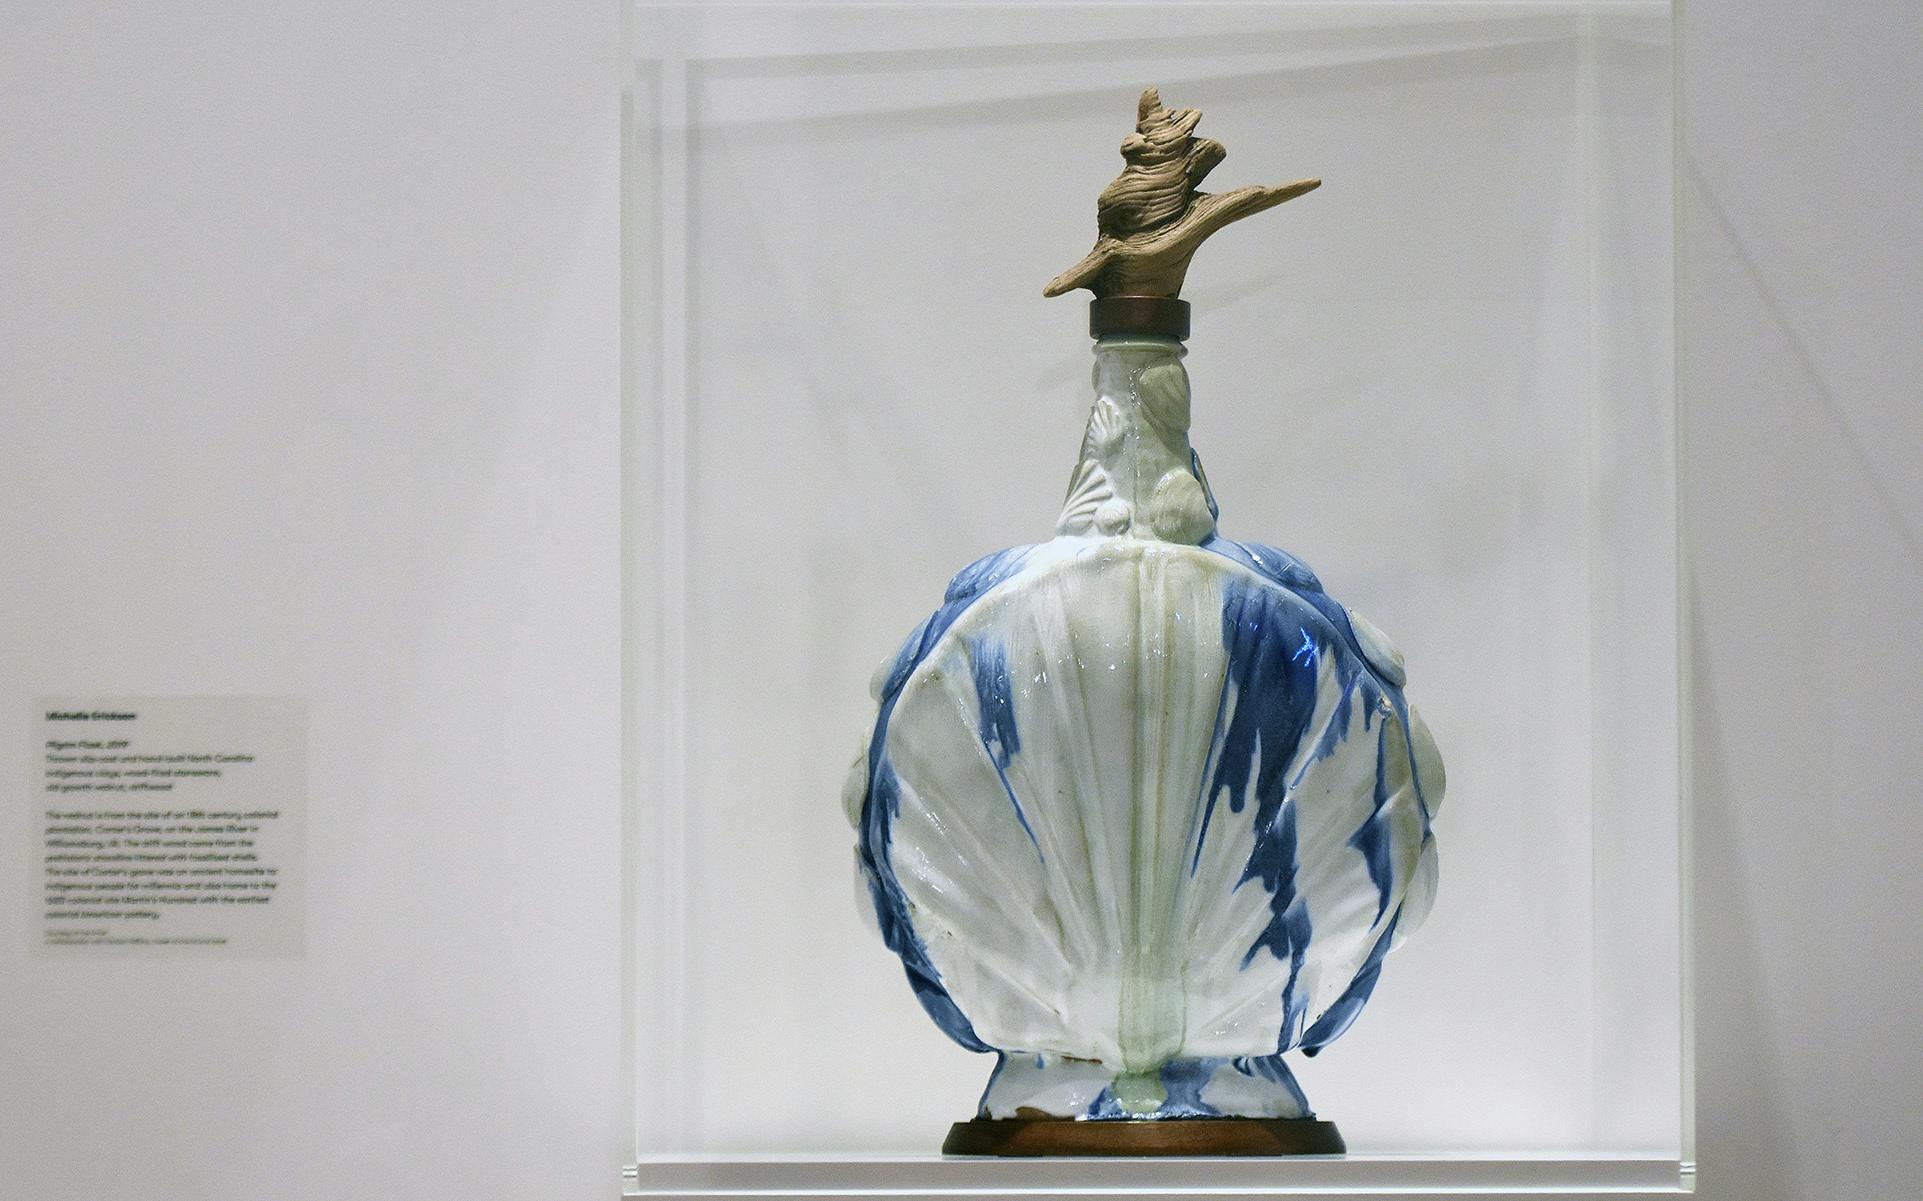 Pilgrim Flask 2019 by Michelle Erickson in Another Crossing at The Box